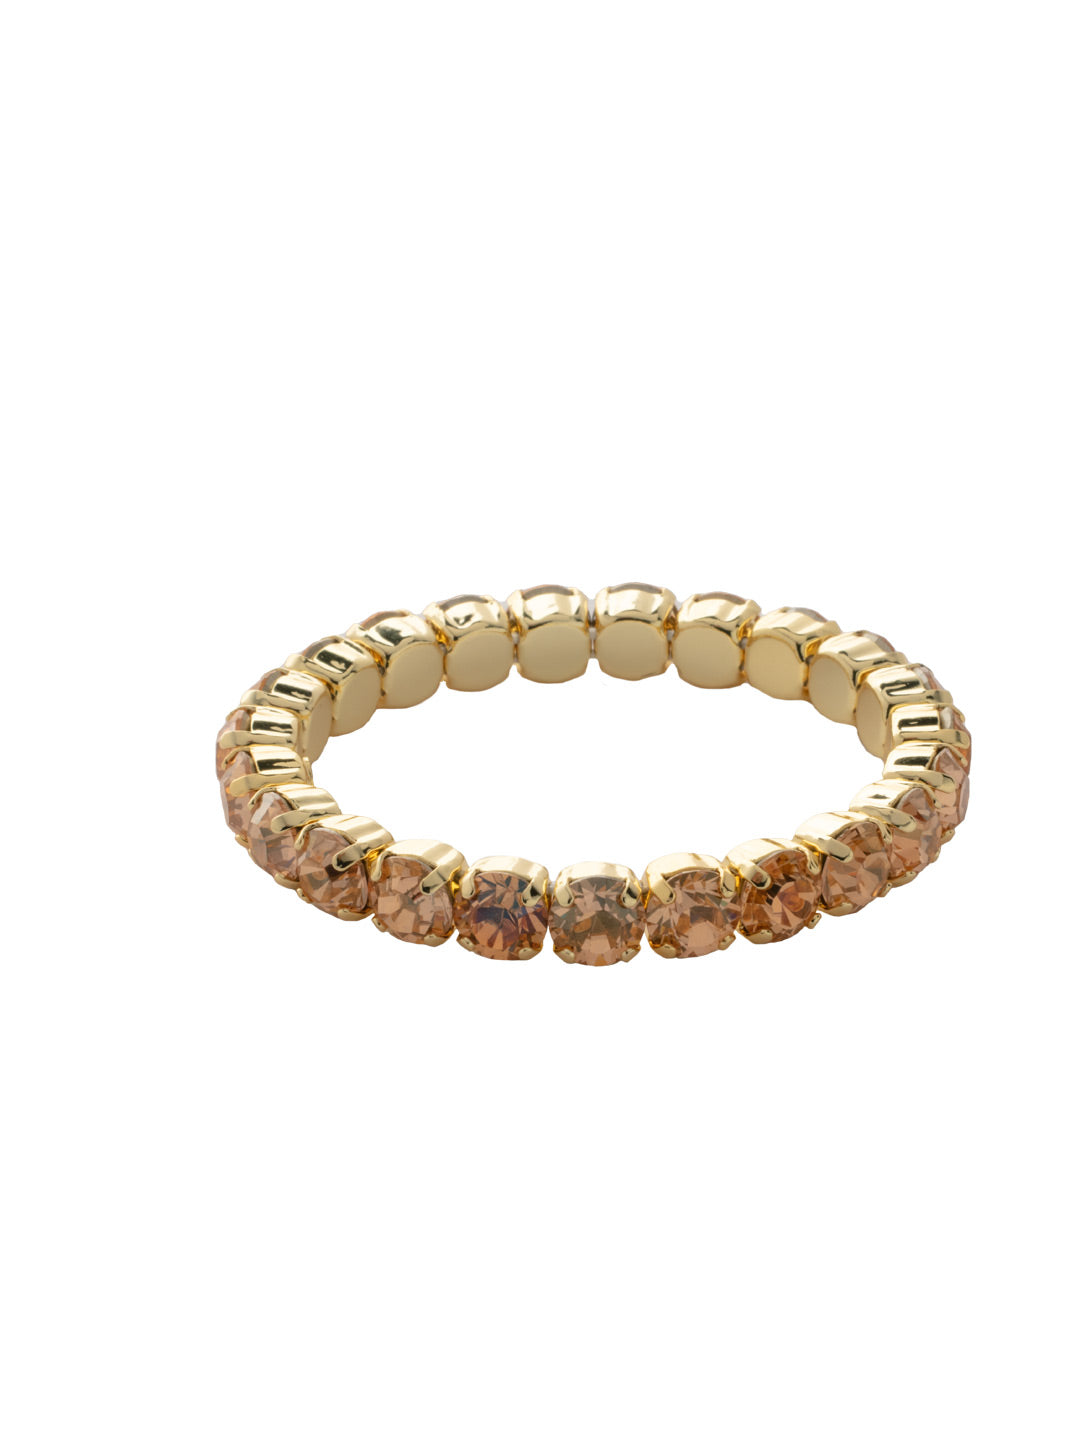 7 inch Sienna Stretch Bracelet - BFD50BGCCO - <p>A modern take on a classic style, the Sienna Stretch Bracelet features a line of crystals on a sturdy jewelers' filament, stretching to fit most wrists comfortably, without the hassle of a clasp! (7 inches in diameter, fits average wrist sizes) From Sorrelli's Caribbean Coral collection in our Bright Gold-tone finish.</p>